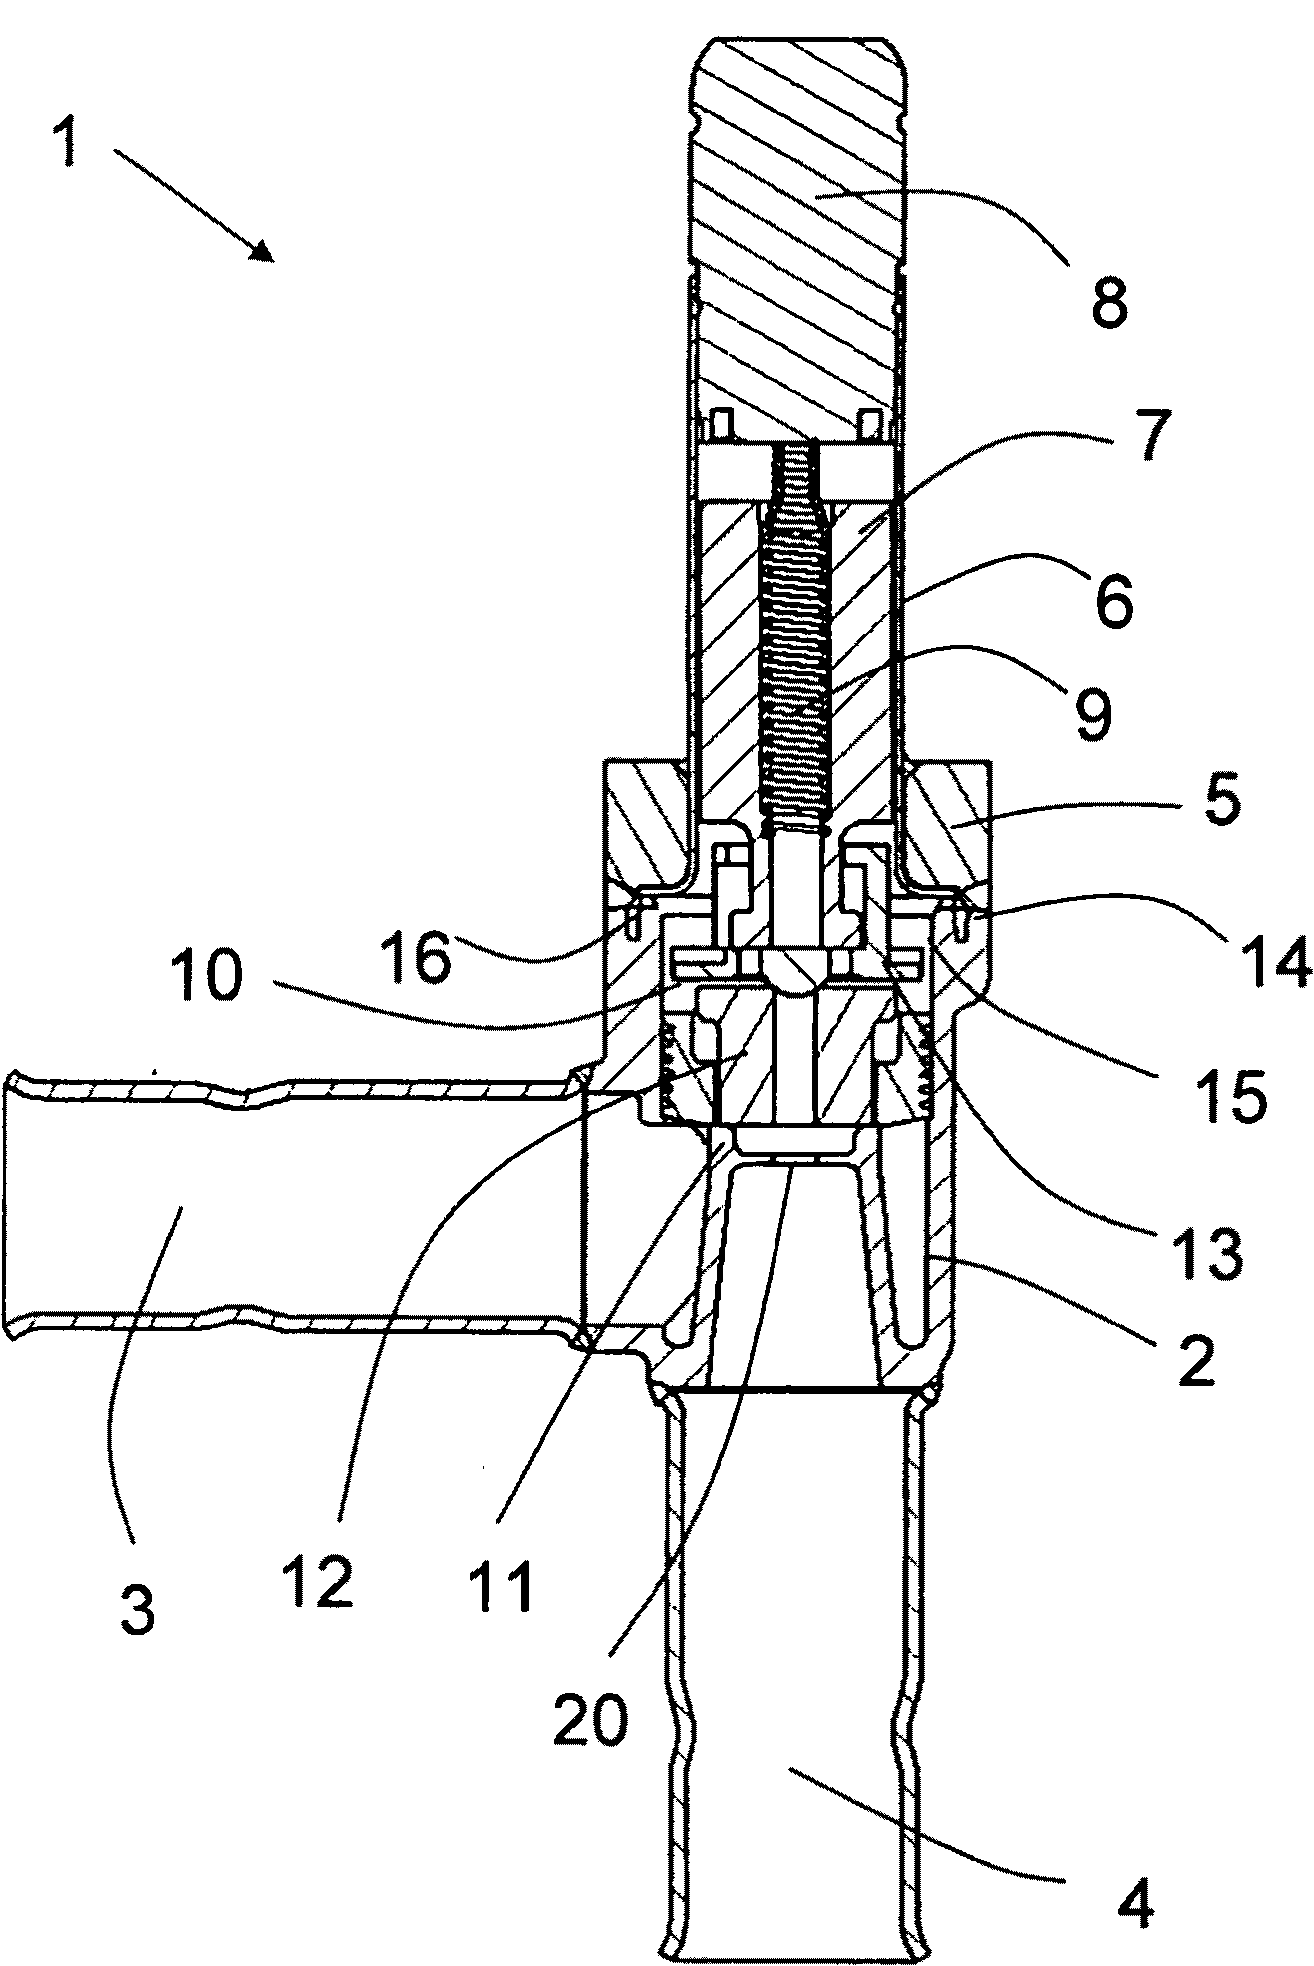 Manufacturing method of a valve